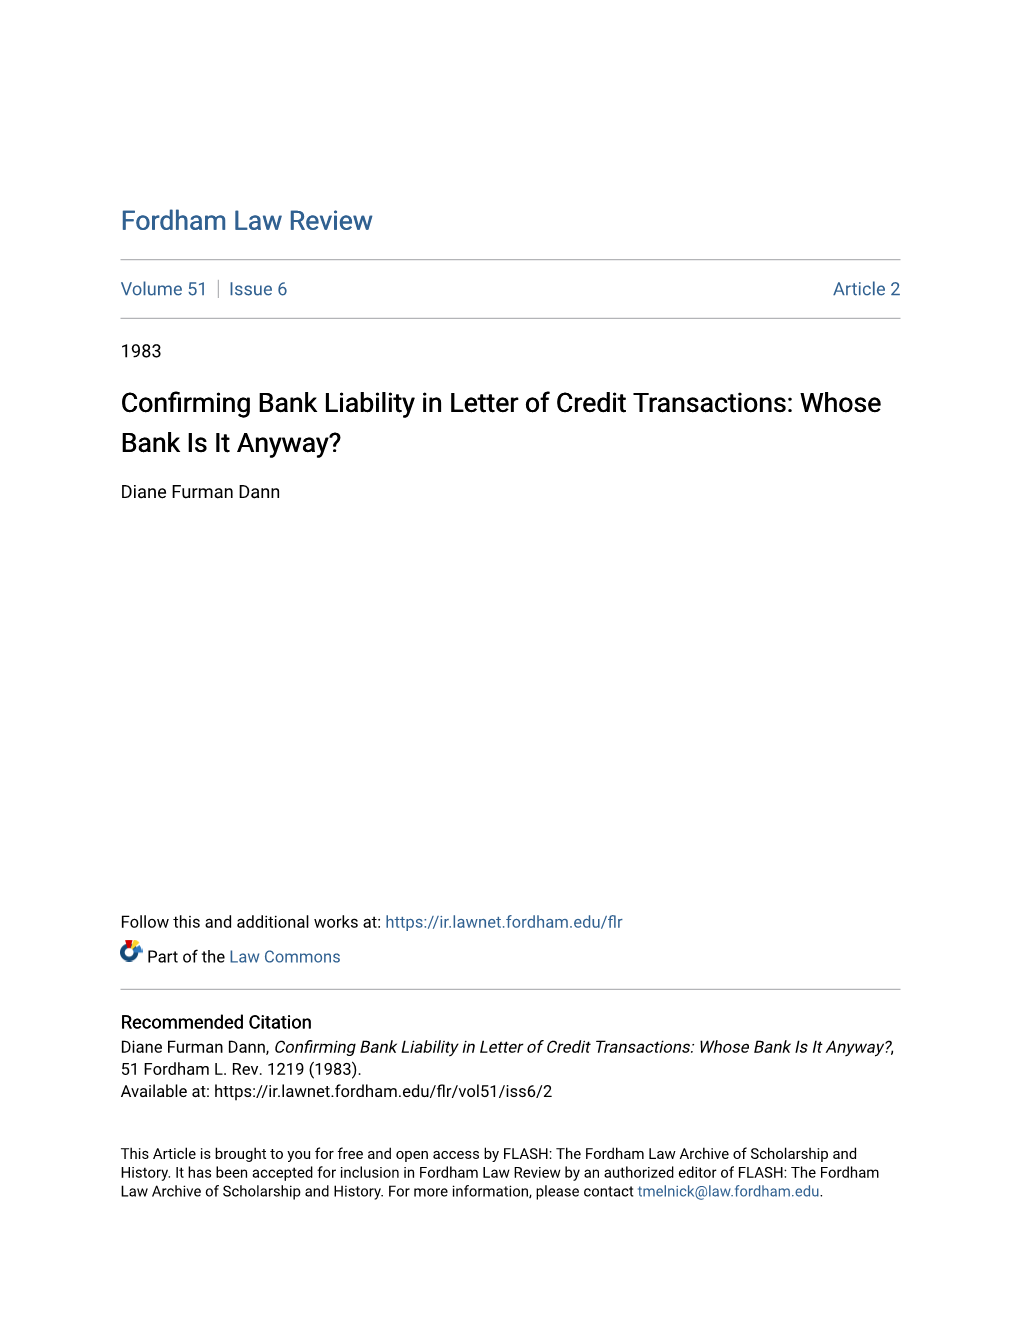 Confirming Bank Liability in Letter of Credit Transactions: Whose Bank Is It Anyway?